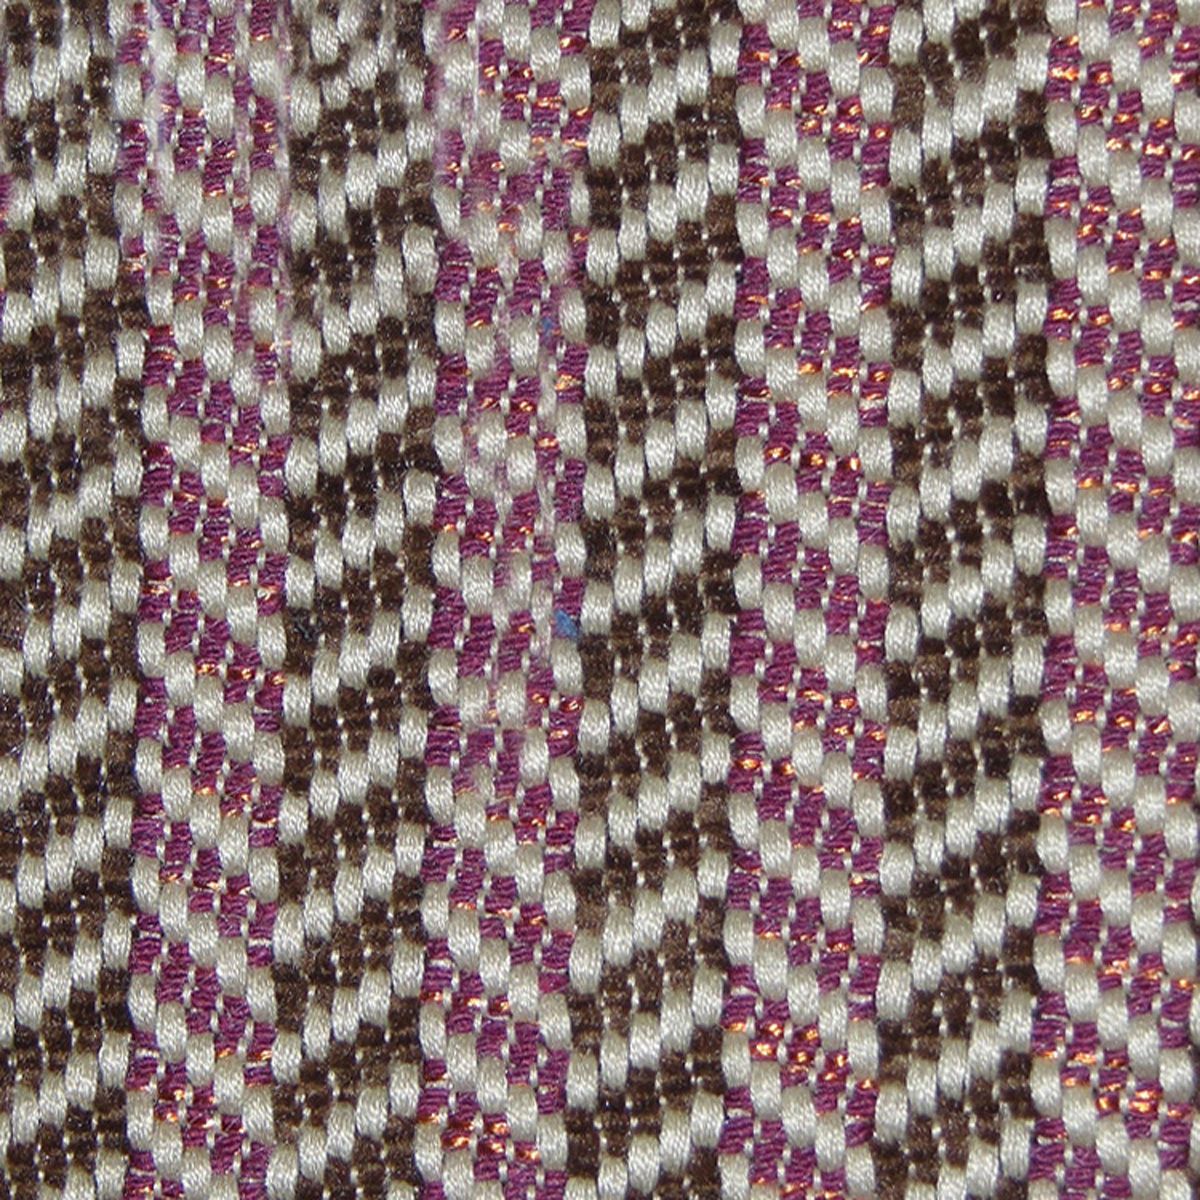 Herring fabric in raspberry truffle color - pattern number VC 00150602 - by Scalamandre in the Old World Weavers collection